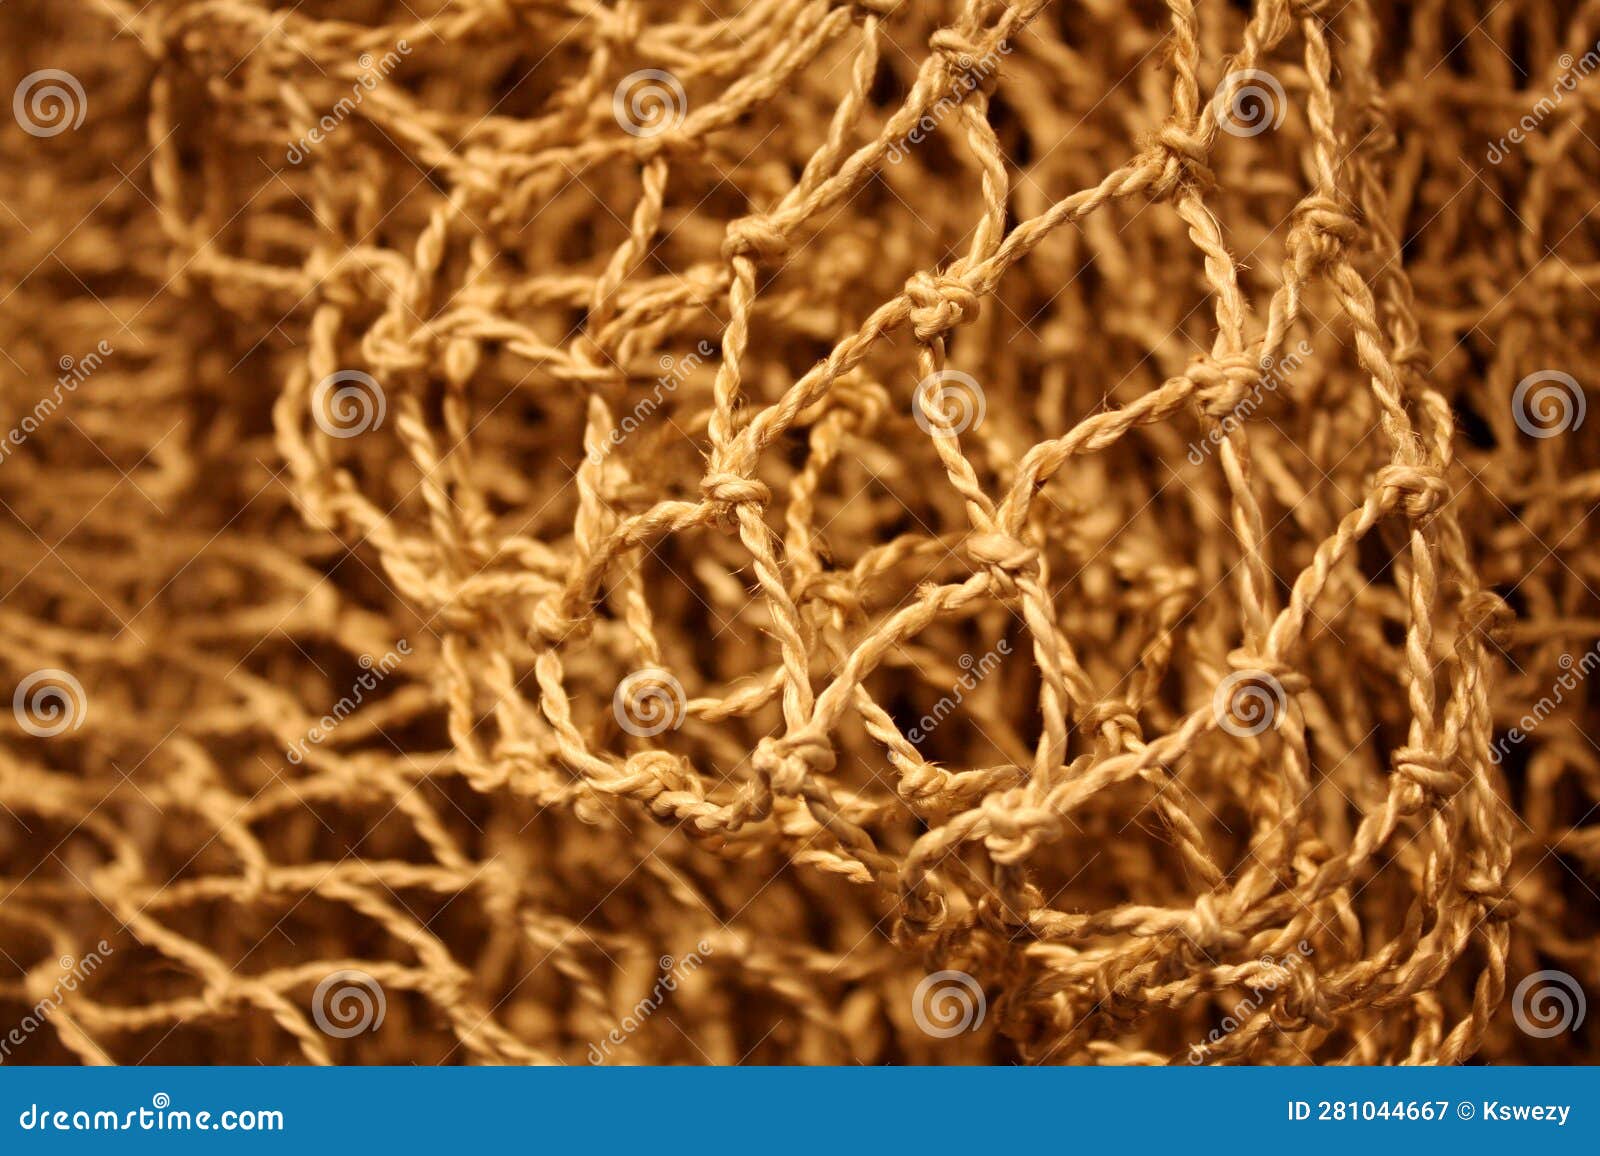 https://thumbs.dreamstime.com/z/close-up-detail-knotted-rope-netting-material-as-textile-background-close-up-detail-knotted-rope-netting-281044667.jpg